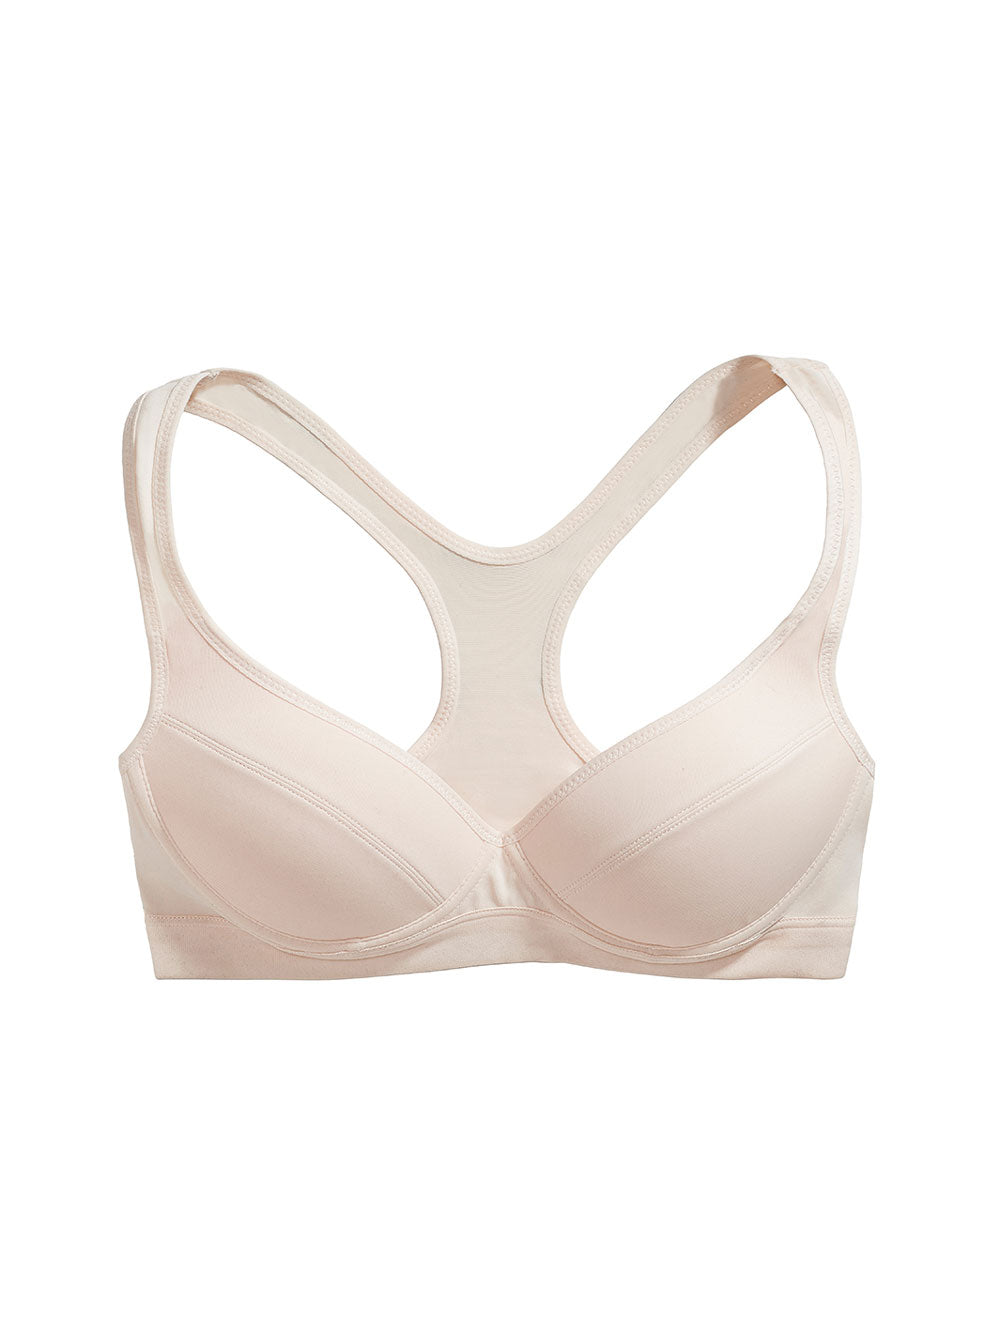 32B Women's Push Up Bra Size undefined - $6 - From Emily